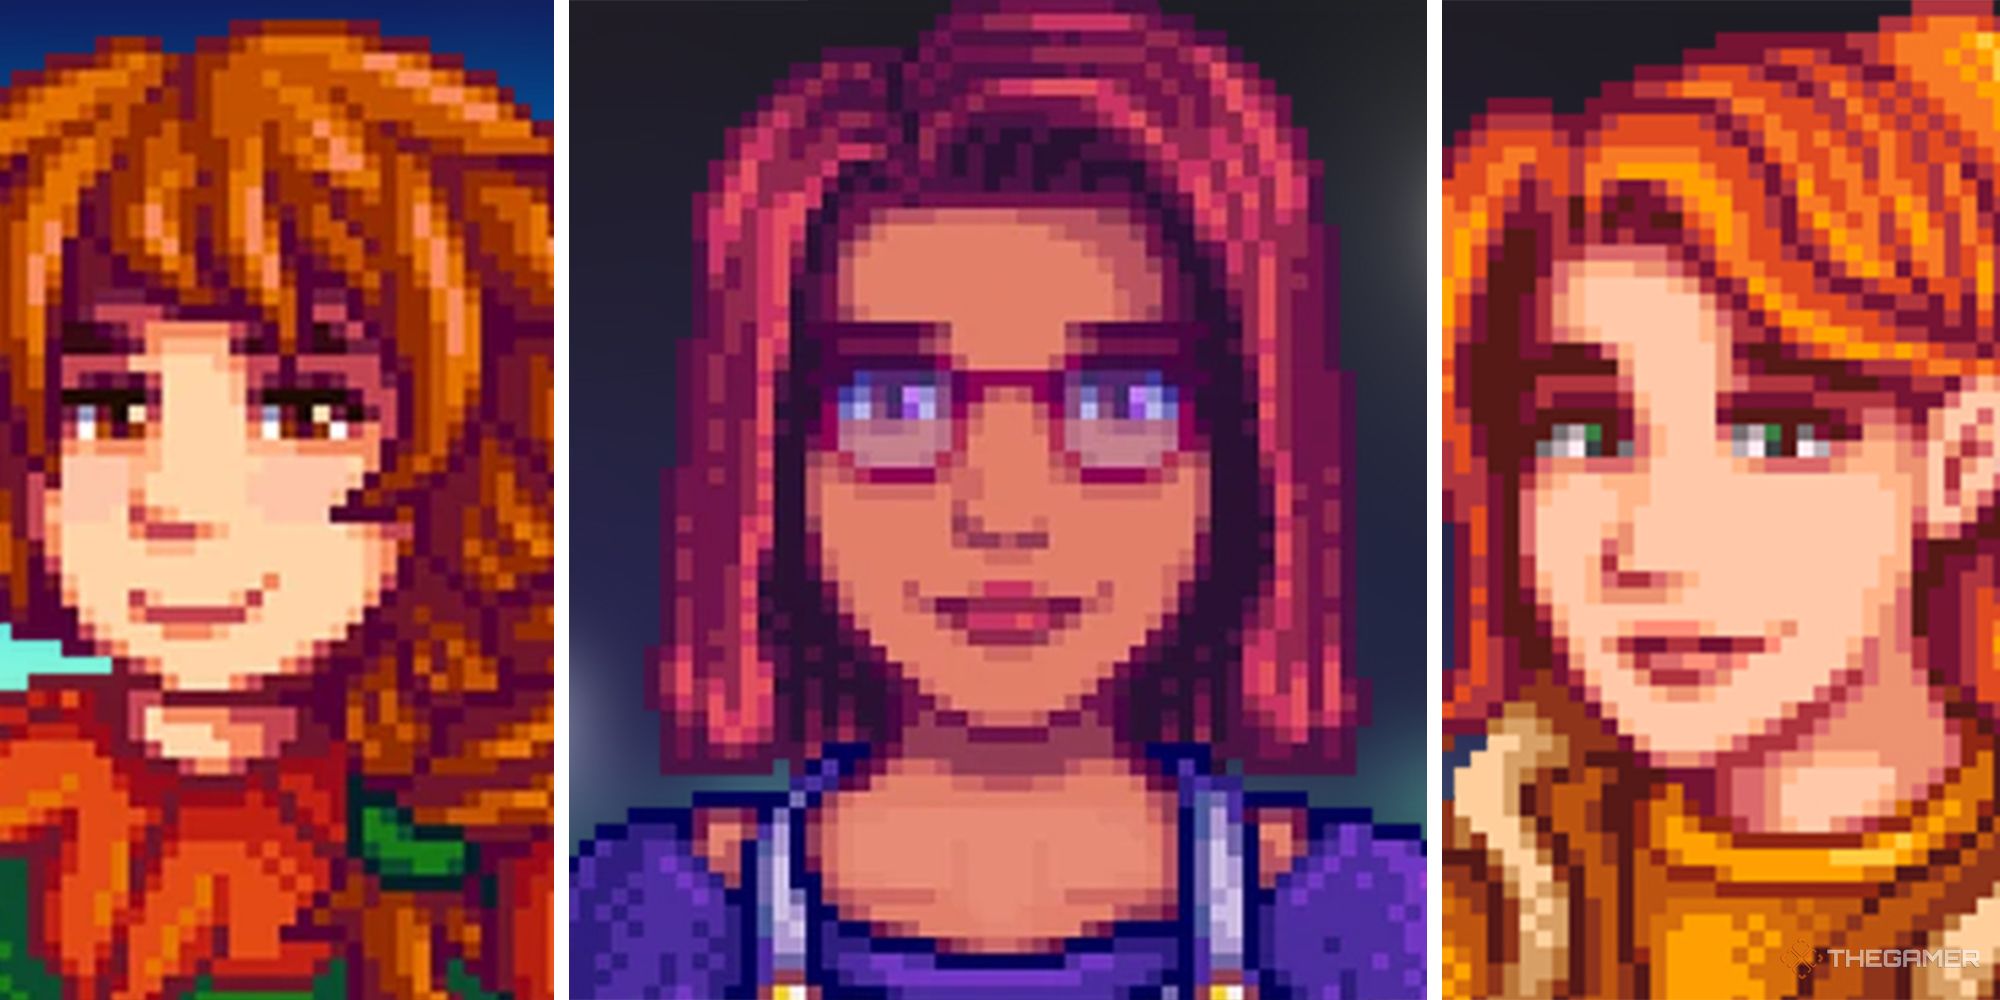 Marnie, Maru, And Robin over a blurred background of Stardew Valley